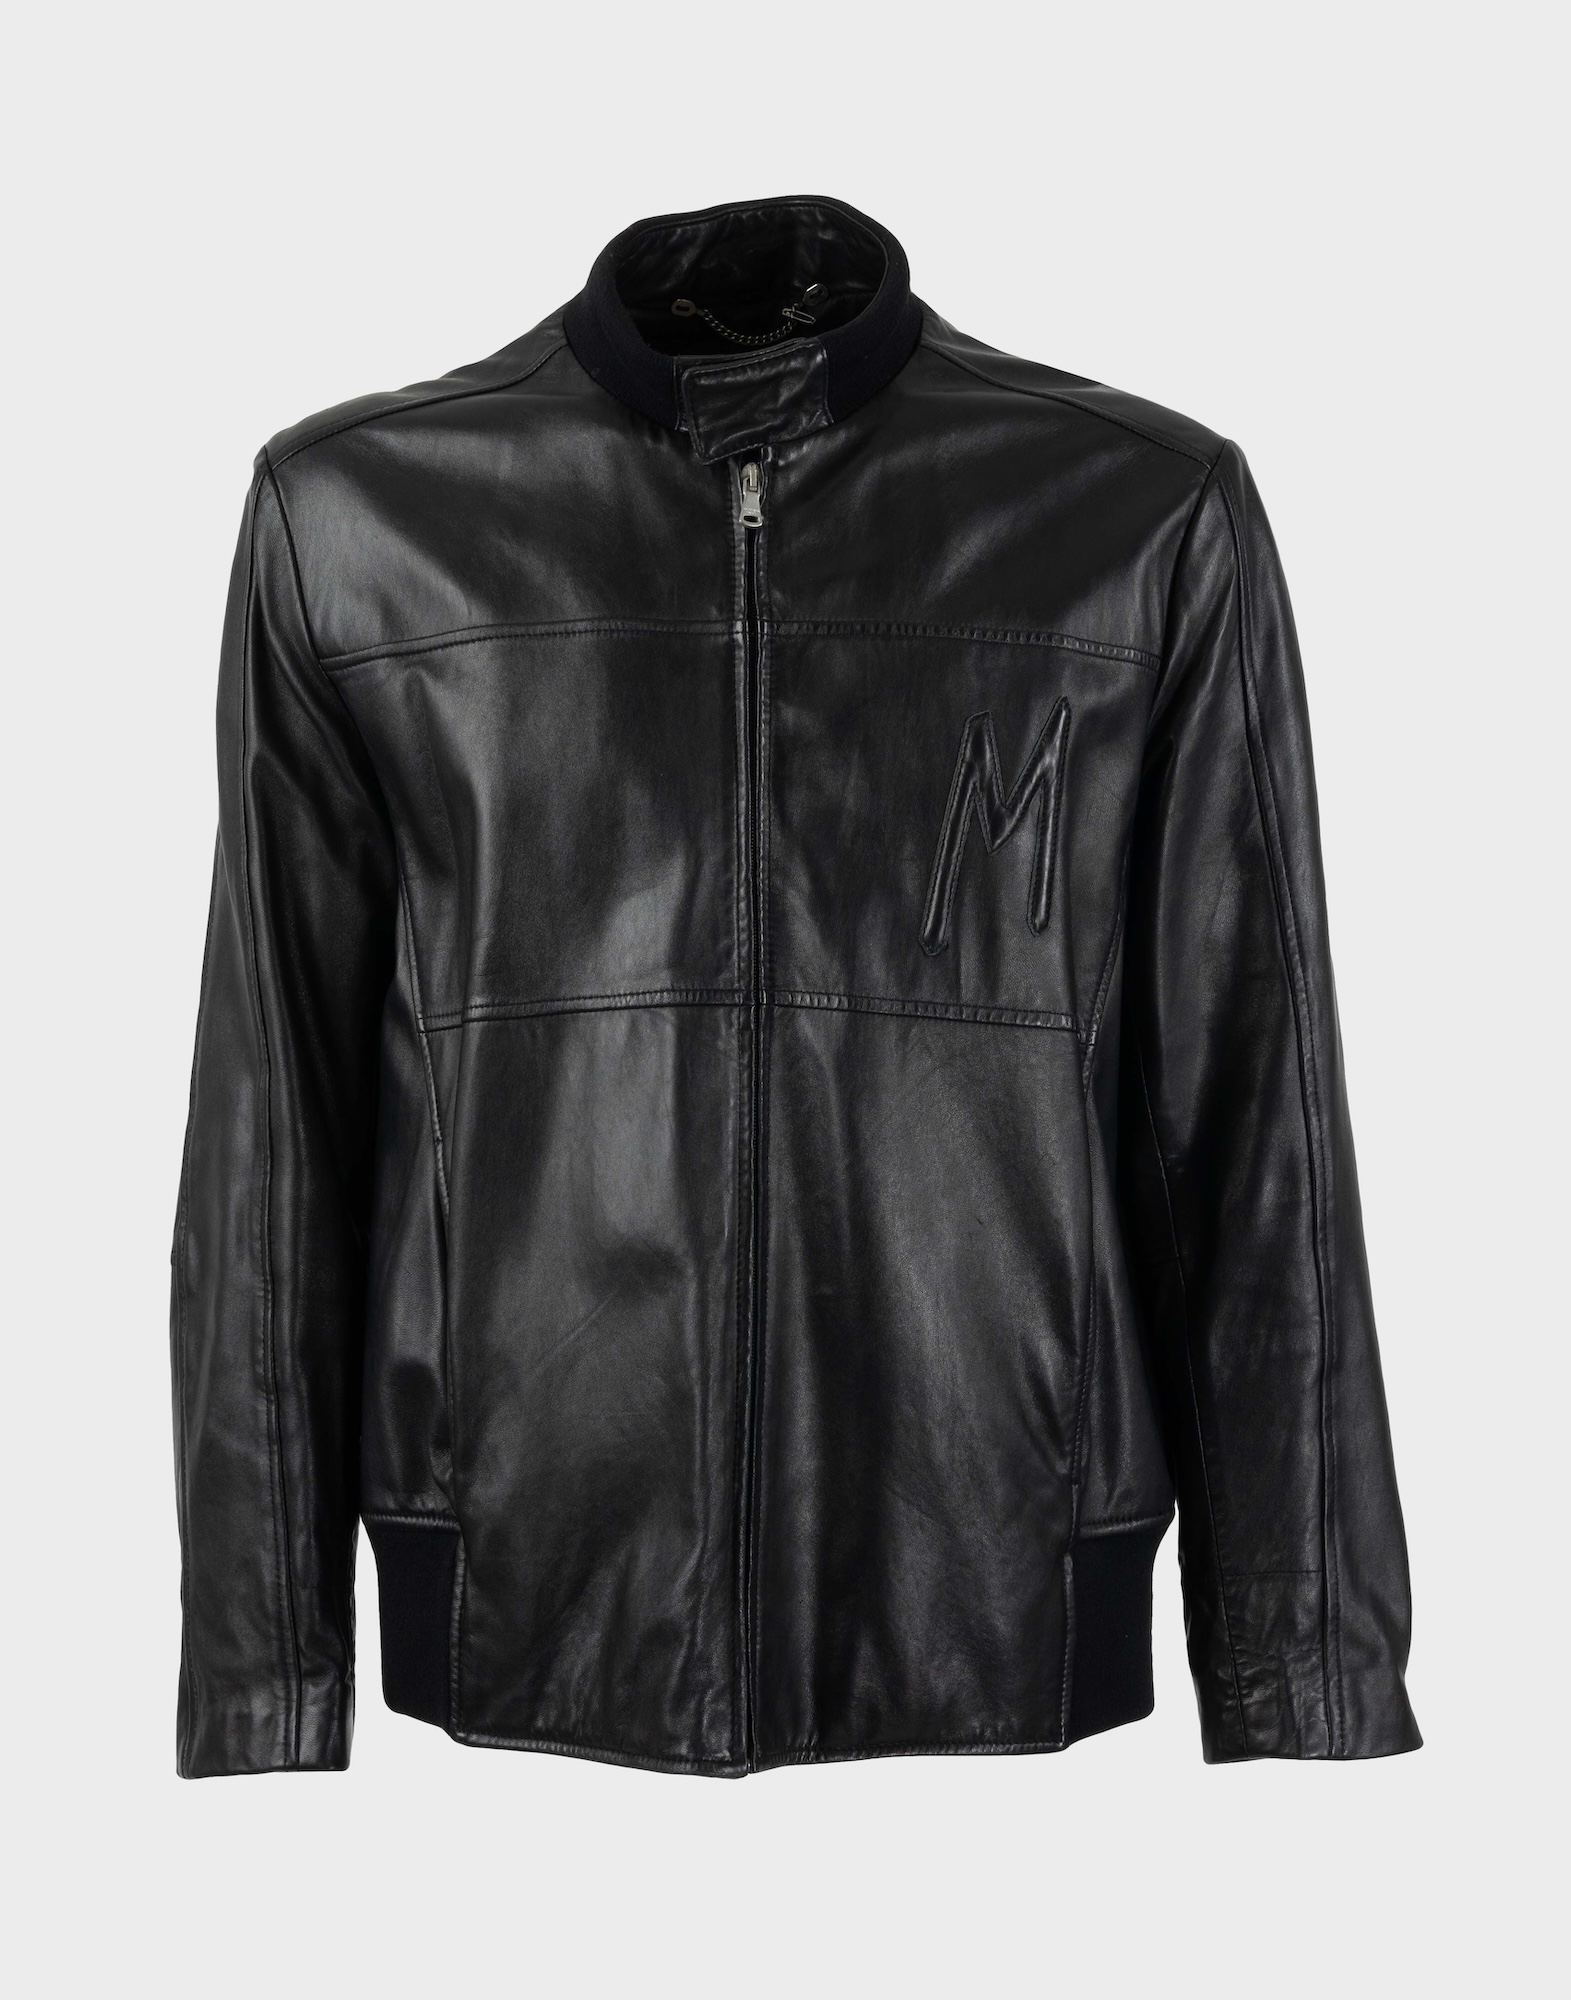 black men's leather jacket, front zip fastener and tone-on-tone embroidered logo on chest